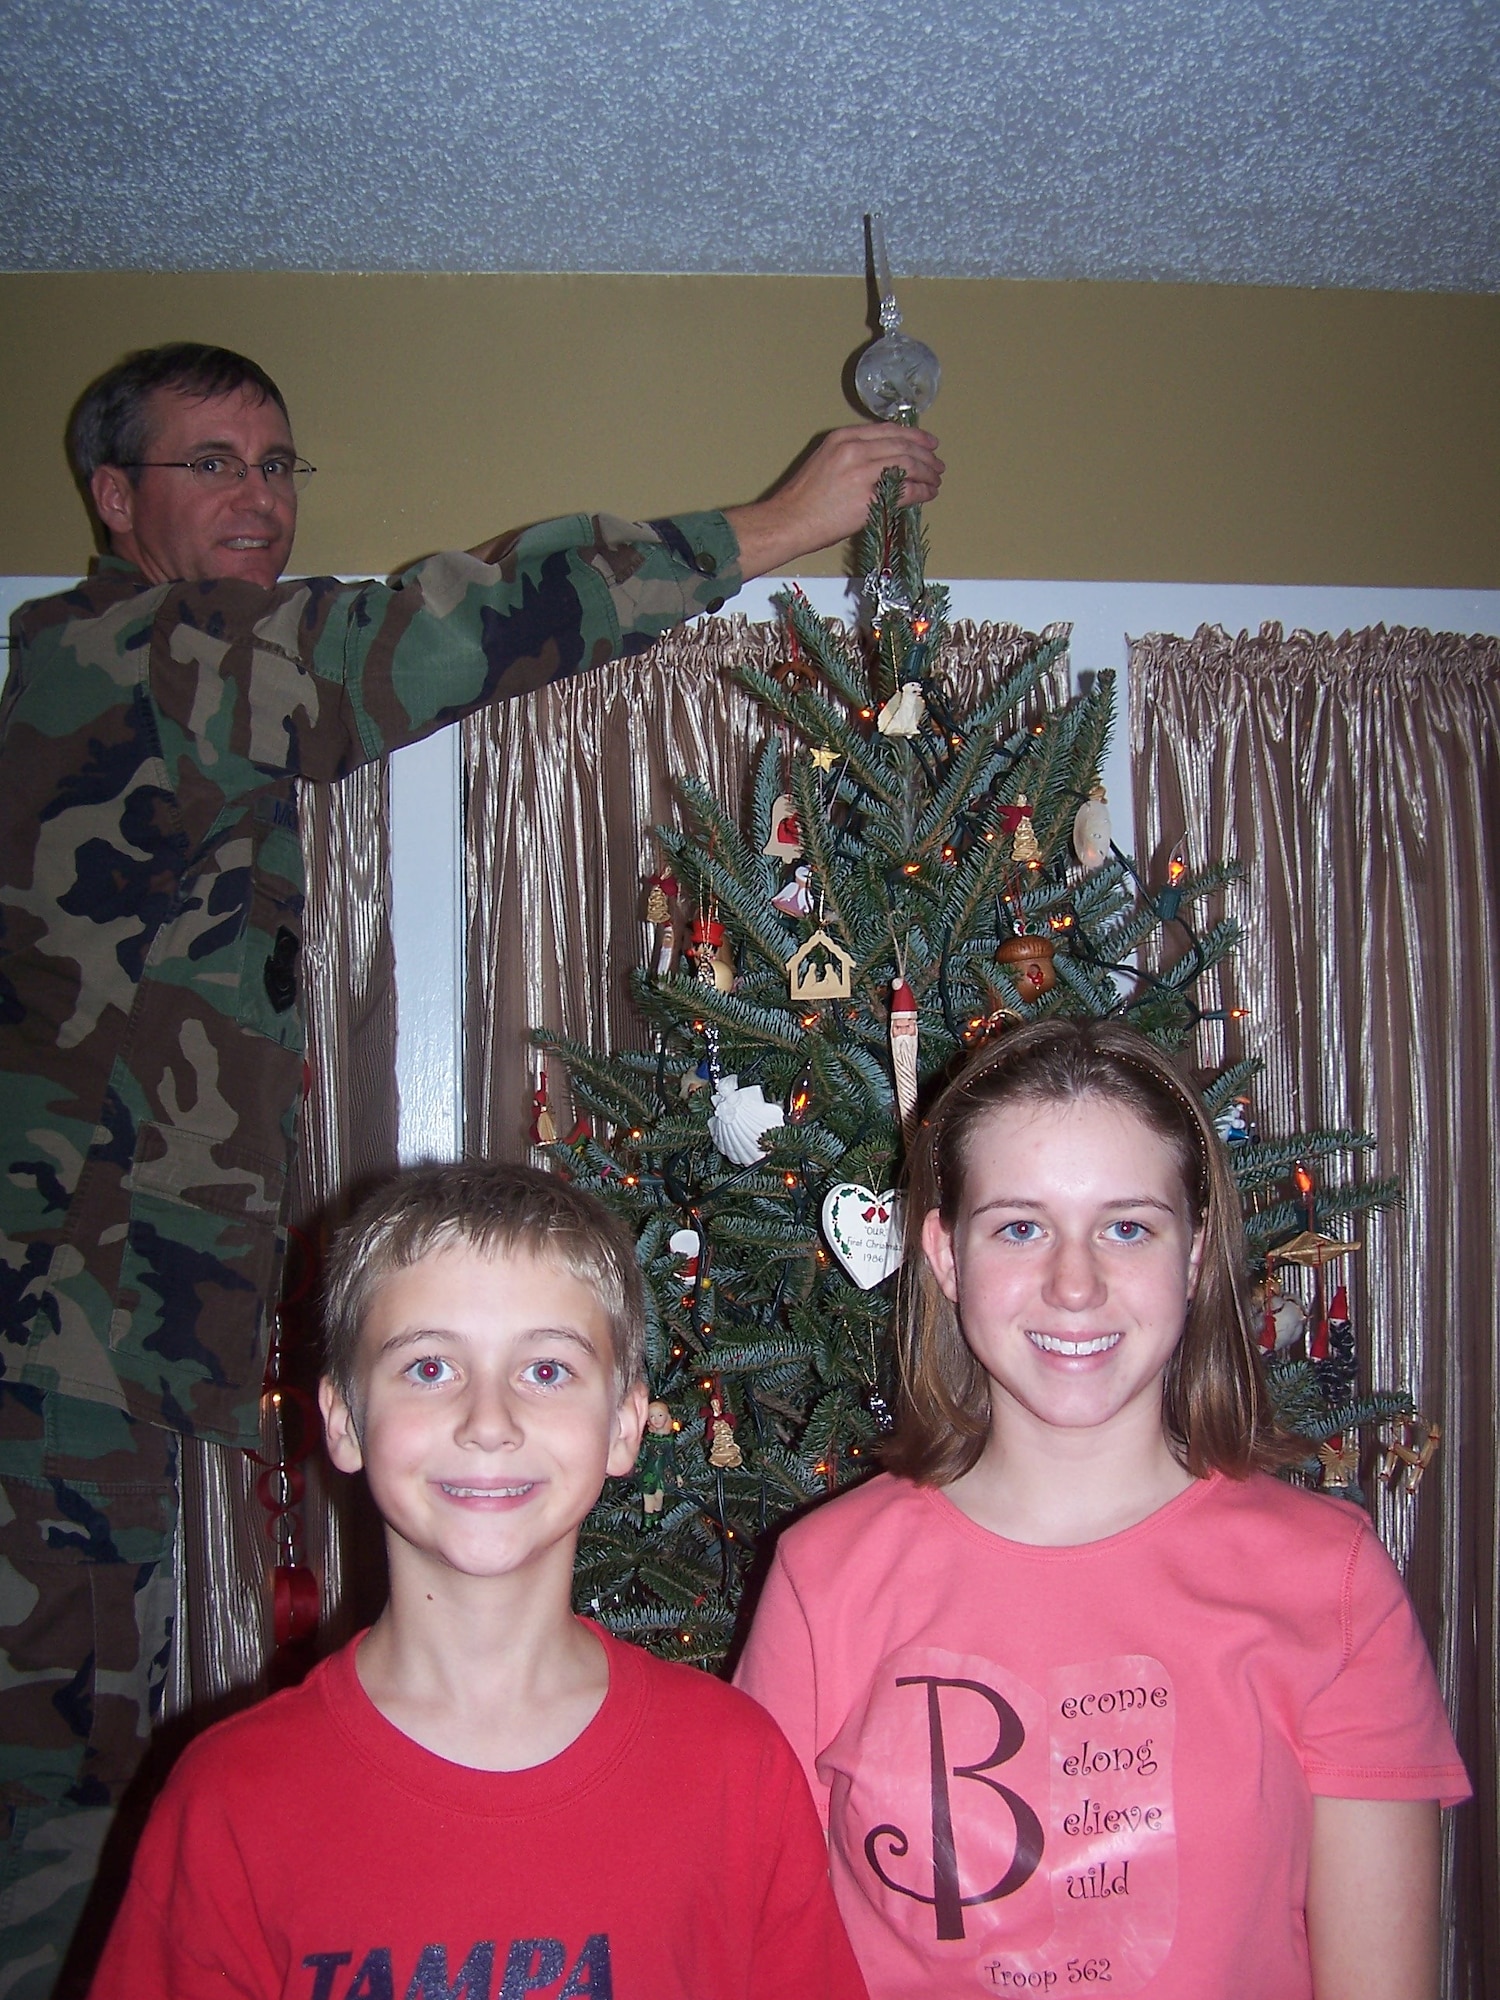 Retired Col. Robert Moriarty and his children, Ryan and Lauren, decorate for Christmas in the living room of their home at MacDill Air Force Base, Florida in December 2006. Like many military families, Moriarty missed a number of holidays with his family during his active-duty years. “The home is the heart of a family — it’s where celebrations take place and memories are made. Our Airmen and their families deserve to live and make memories in quality homes,” said Moriarty, who today serves as the Air Force Civil Engineer Center’s Installations Director and housing privatization program execution office. (Photo courtesy of the Moriarty family) 